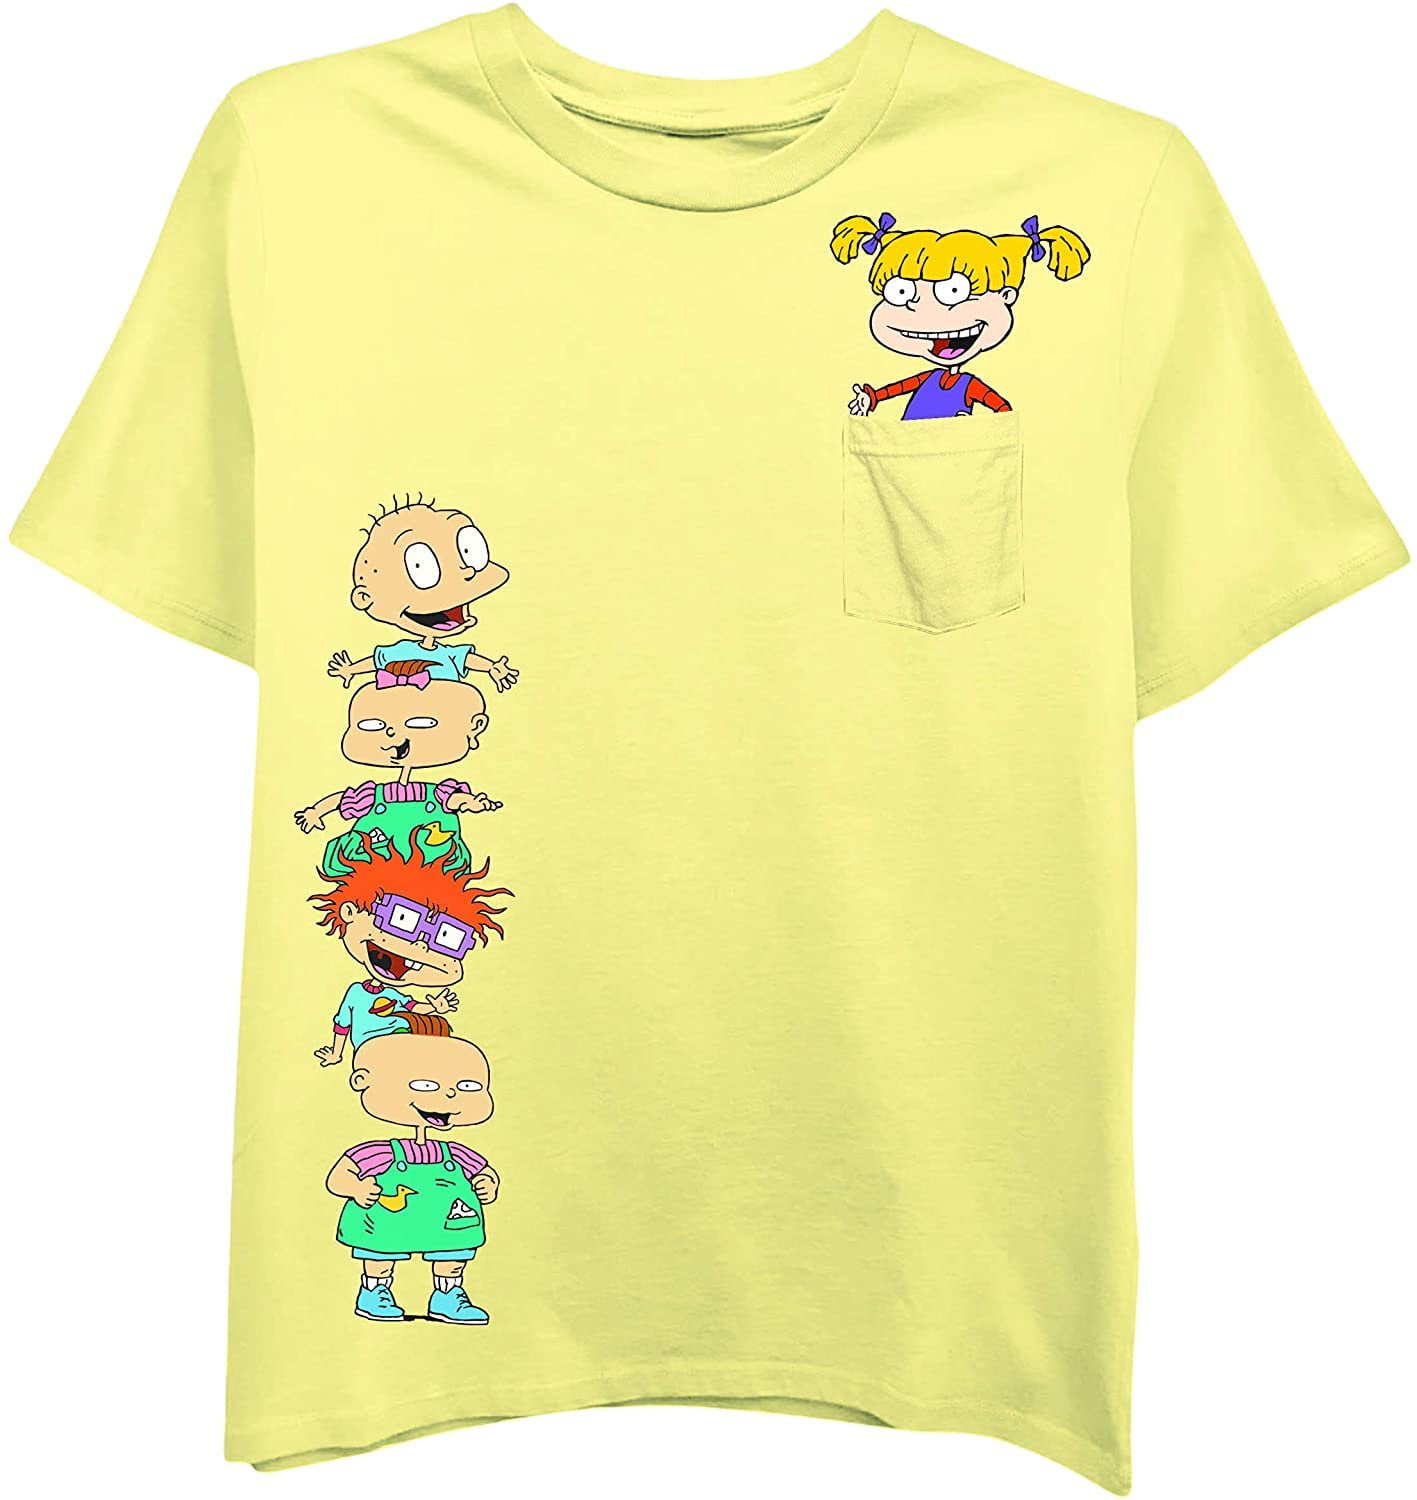 Nickelodeon Ladies 90's Fashion Shirt - Rugrats, Angelica and Chuckie ...